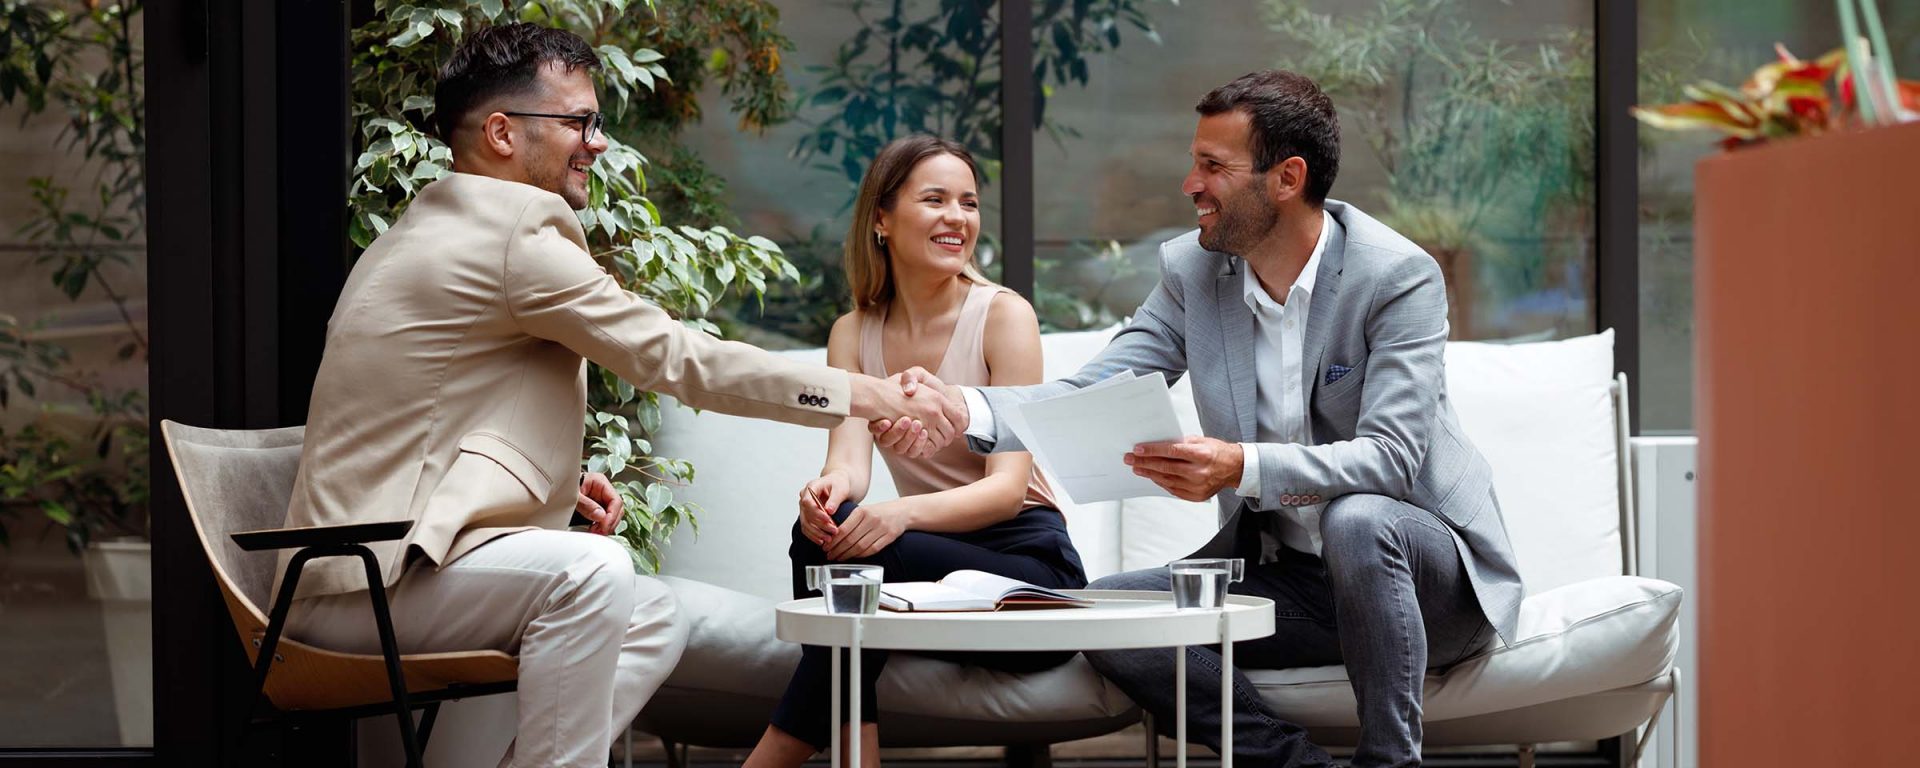 Woman and two men sitting around a table discussing the question what is ethical business